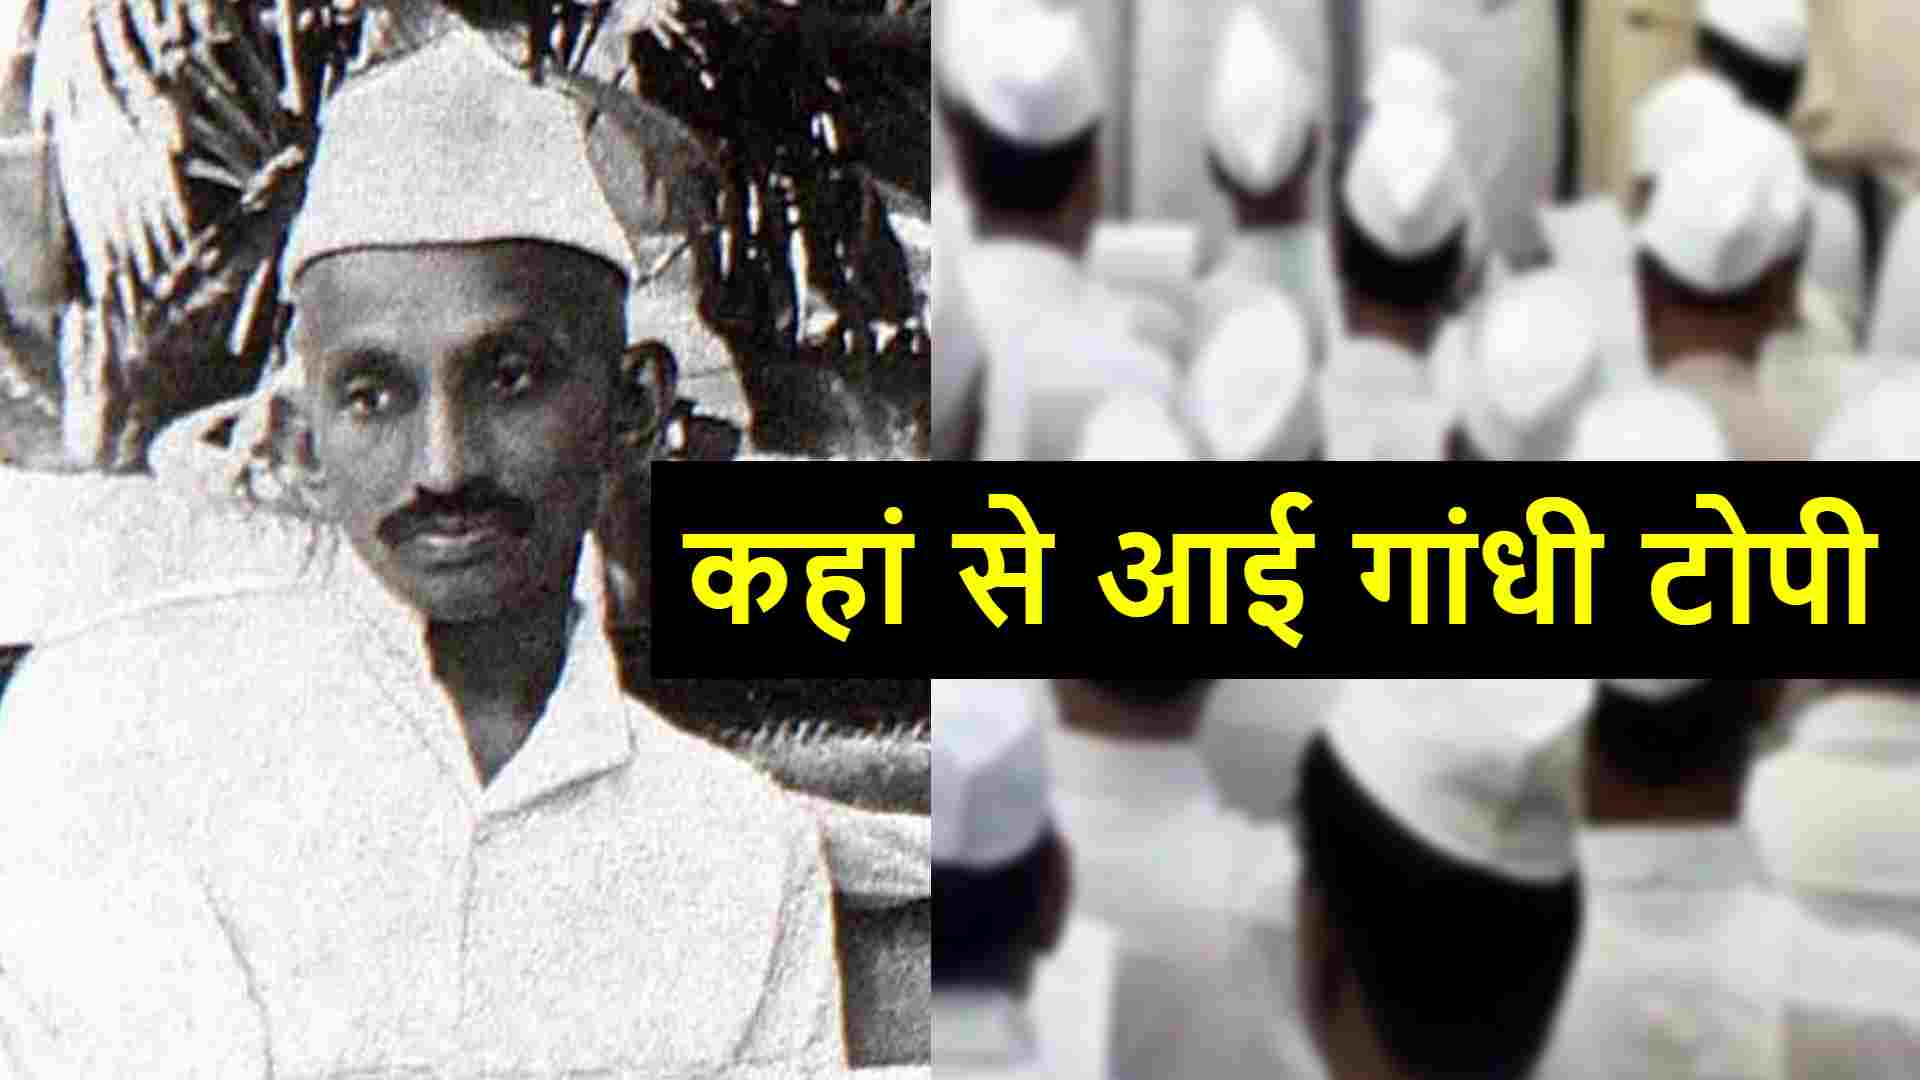 Where did the Gandhi cap come from?